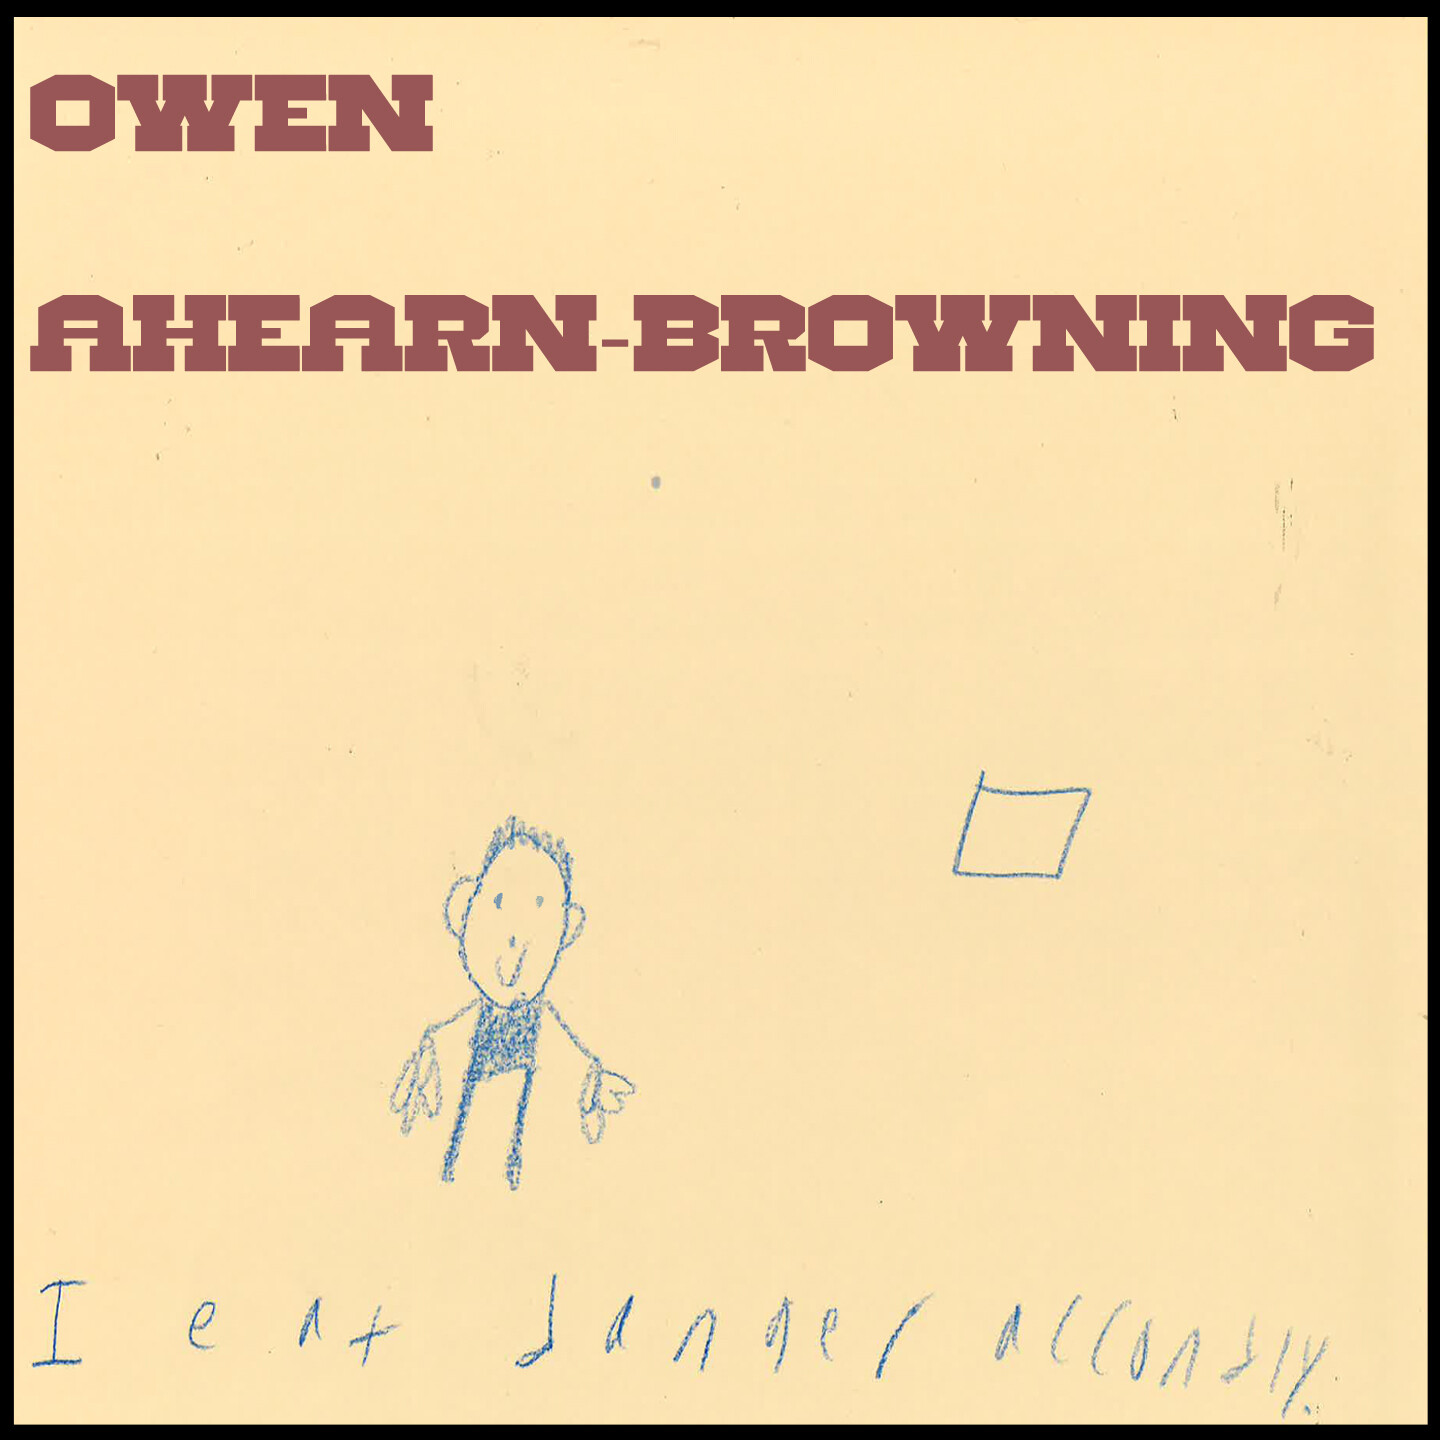 I Eat Danger Occasionally by Owen Ahearn Browning